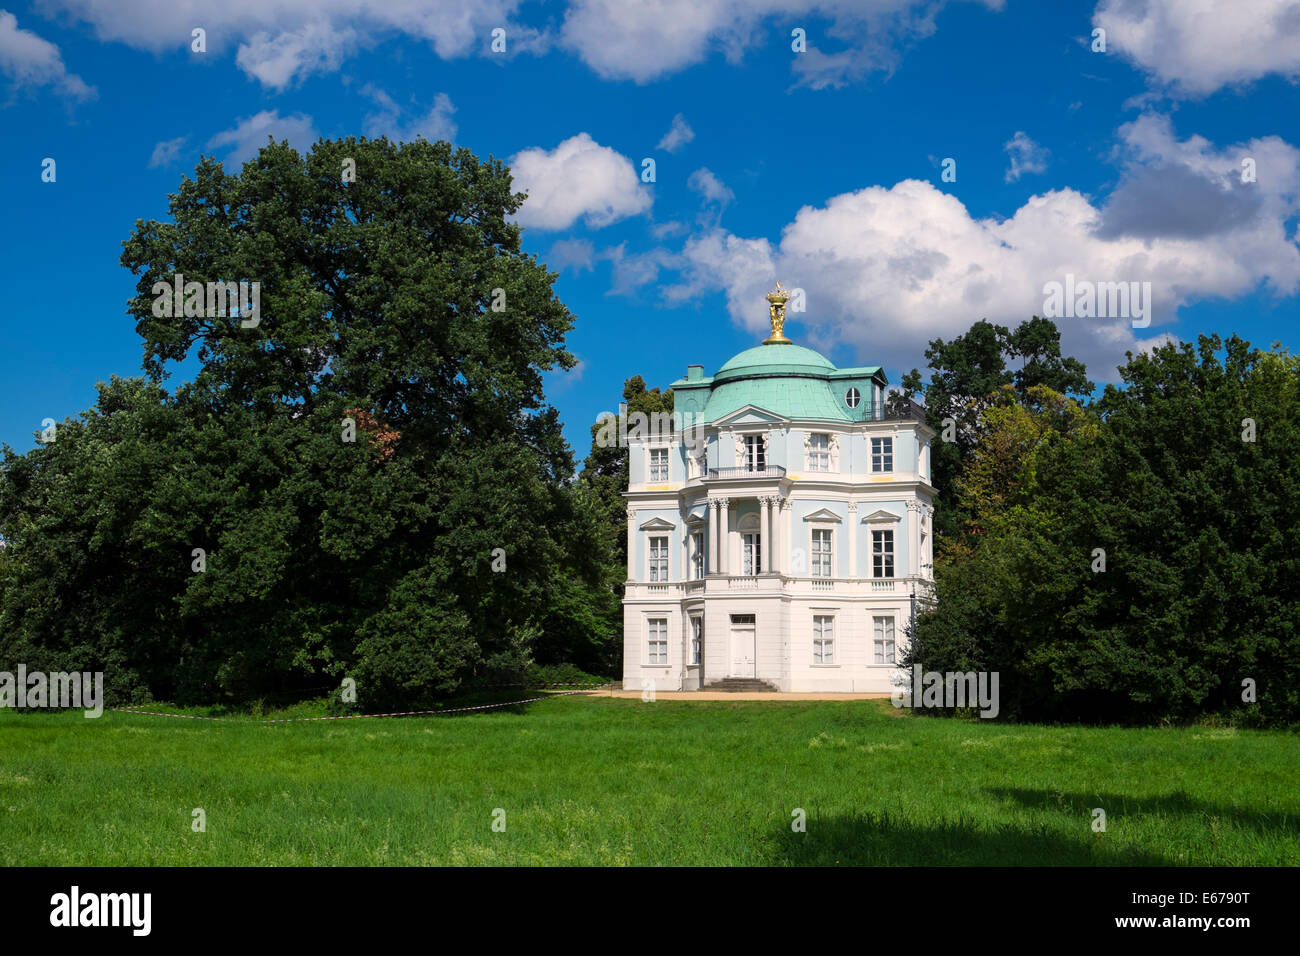 The Belvedere within the gardens of the Schloss Charlottenburg Berlin Germany Stock Photo